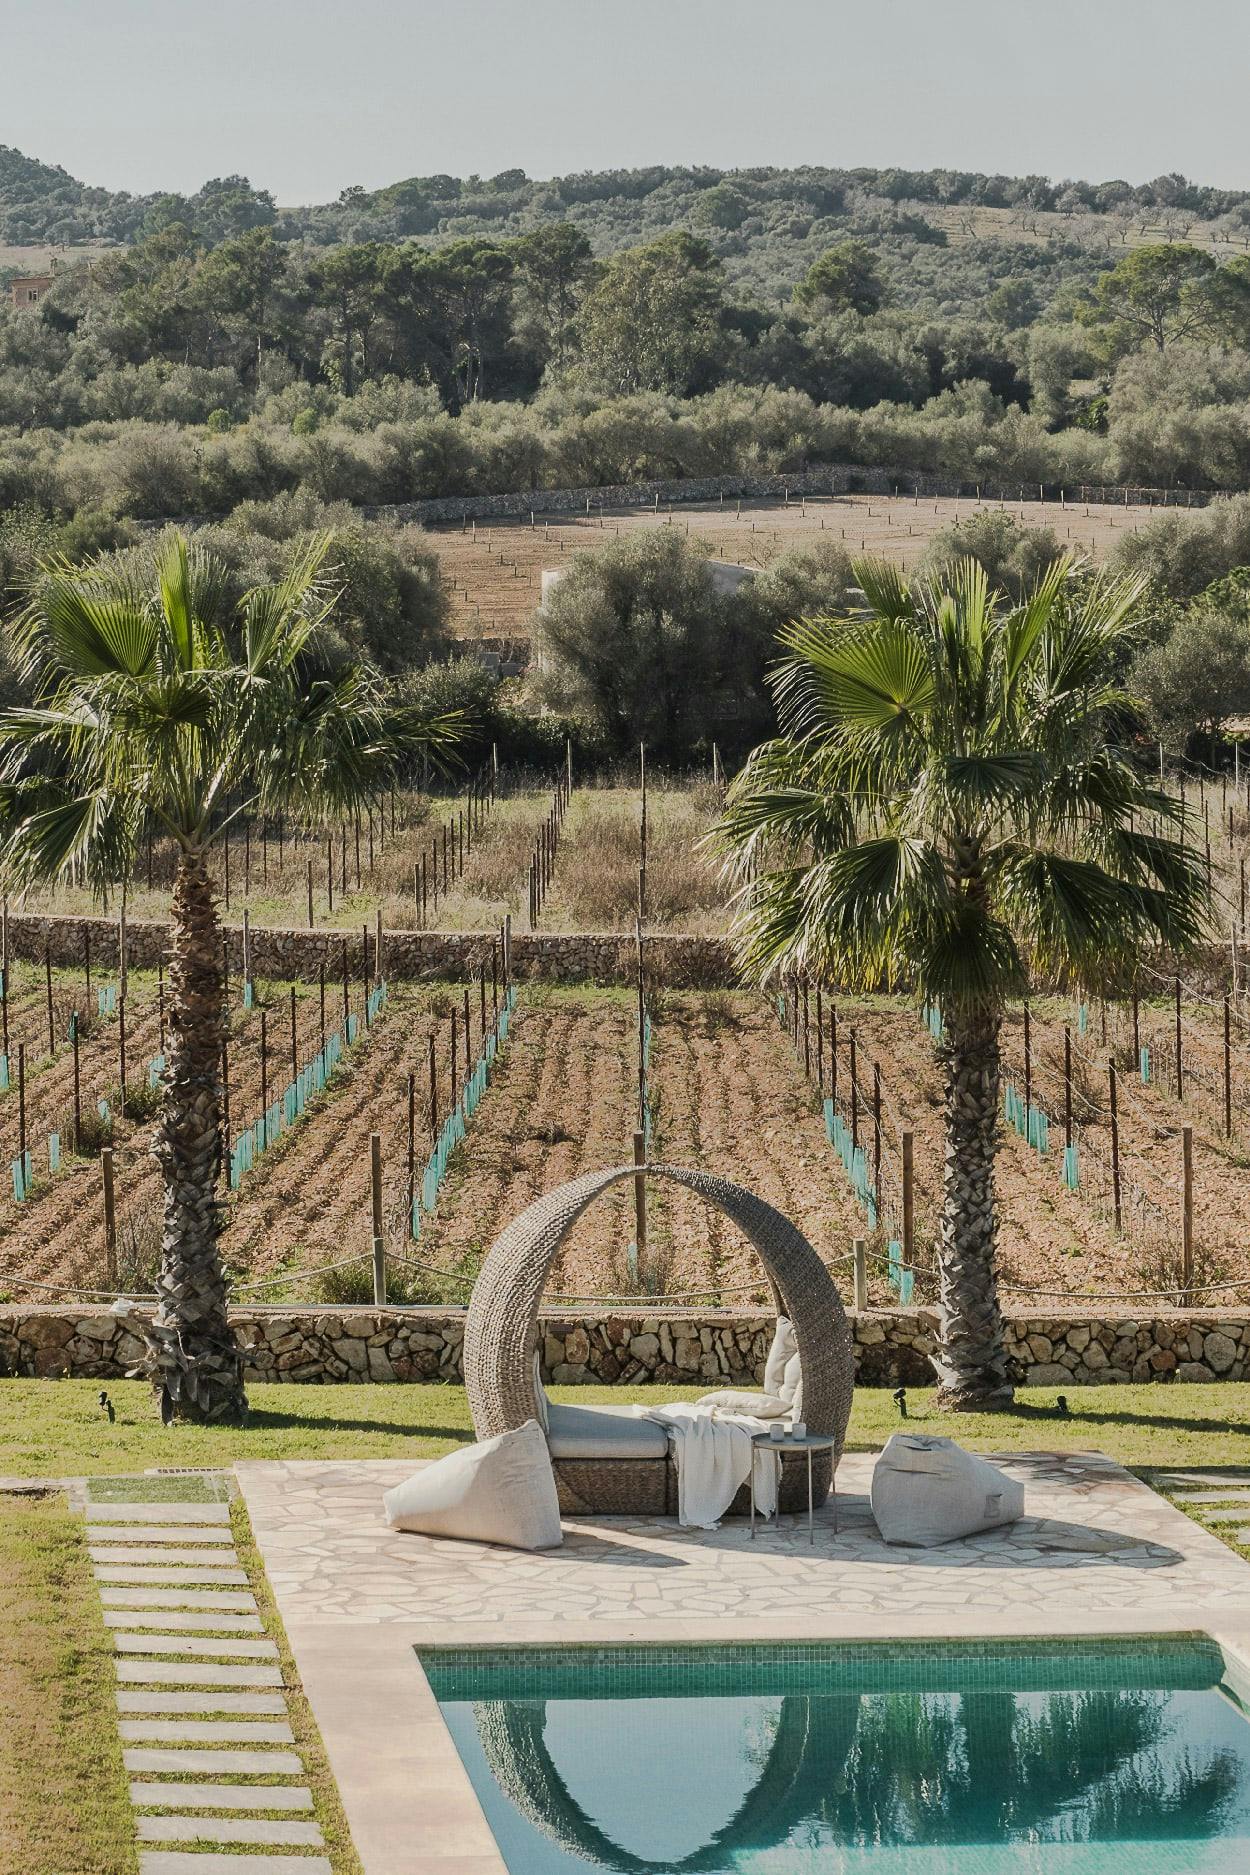 The image features a large swimming pool surrounded by a lush green field, with a view of a hillside and a garden. There are several palm trees in the area, and a bench is placed near the pool.